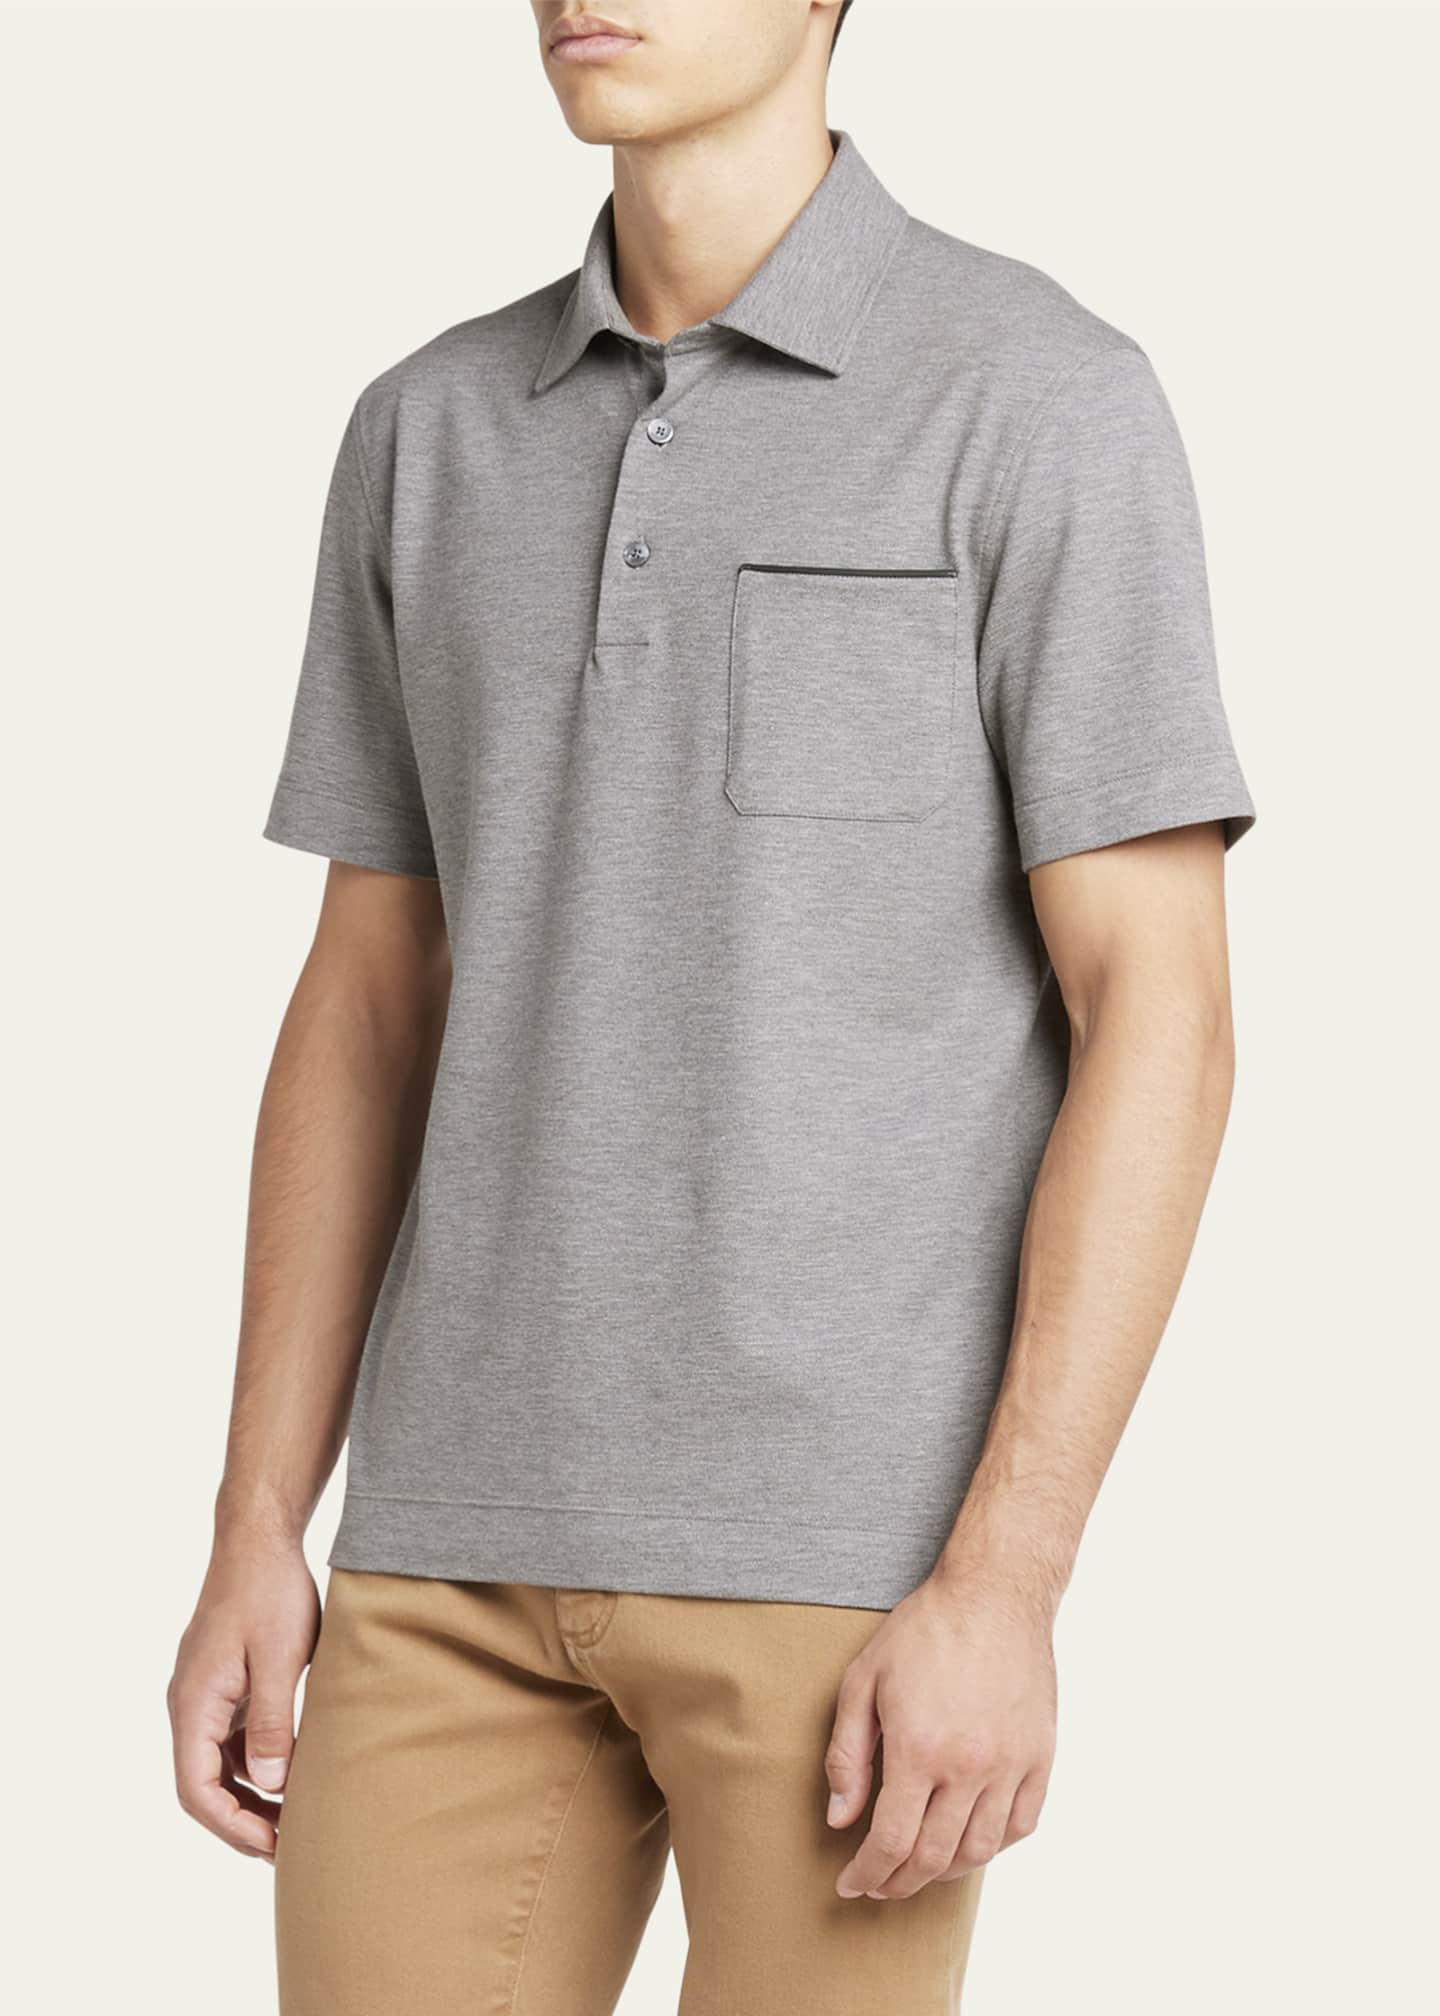 ZEGNA Men's Cotton Polo Shirt with Leather-Trim Pocket - Bergdorf